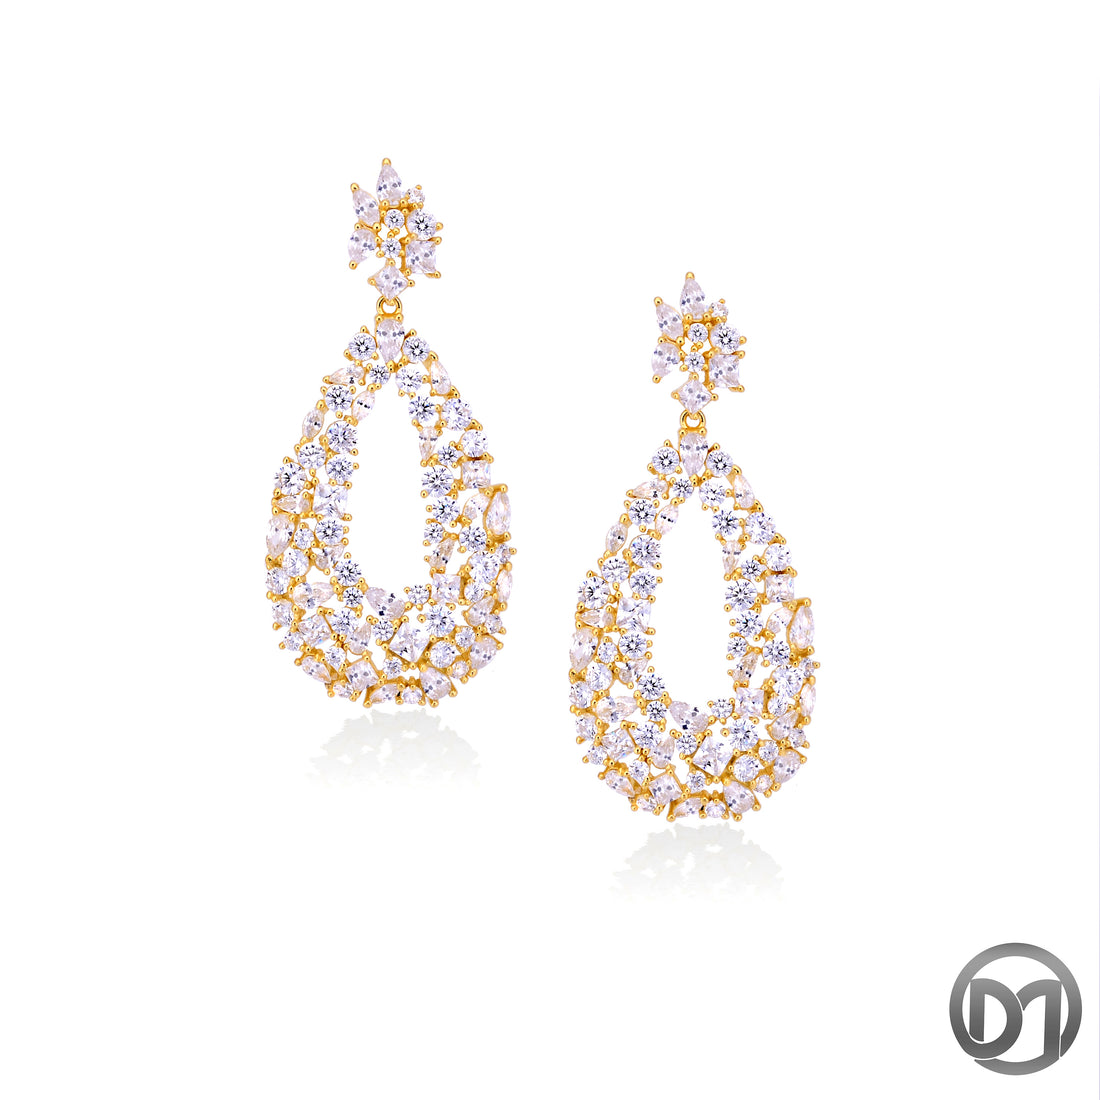 Fashion Chandelier Silver 925 Earrings with Cubic Zirconia